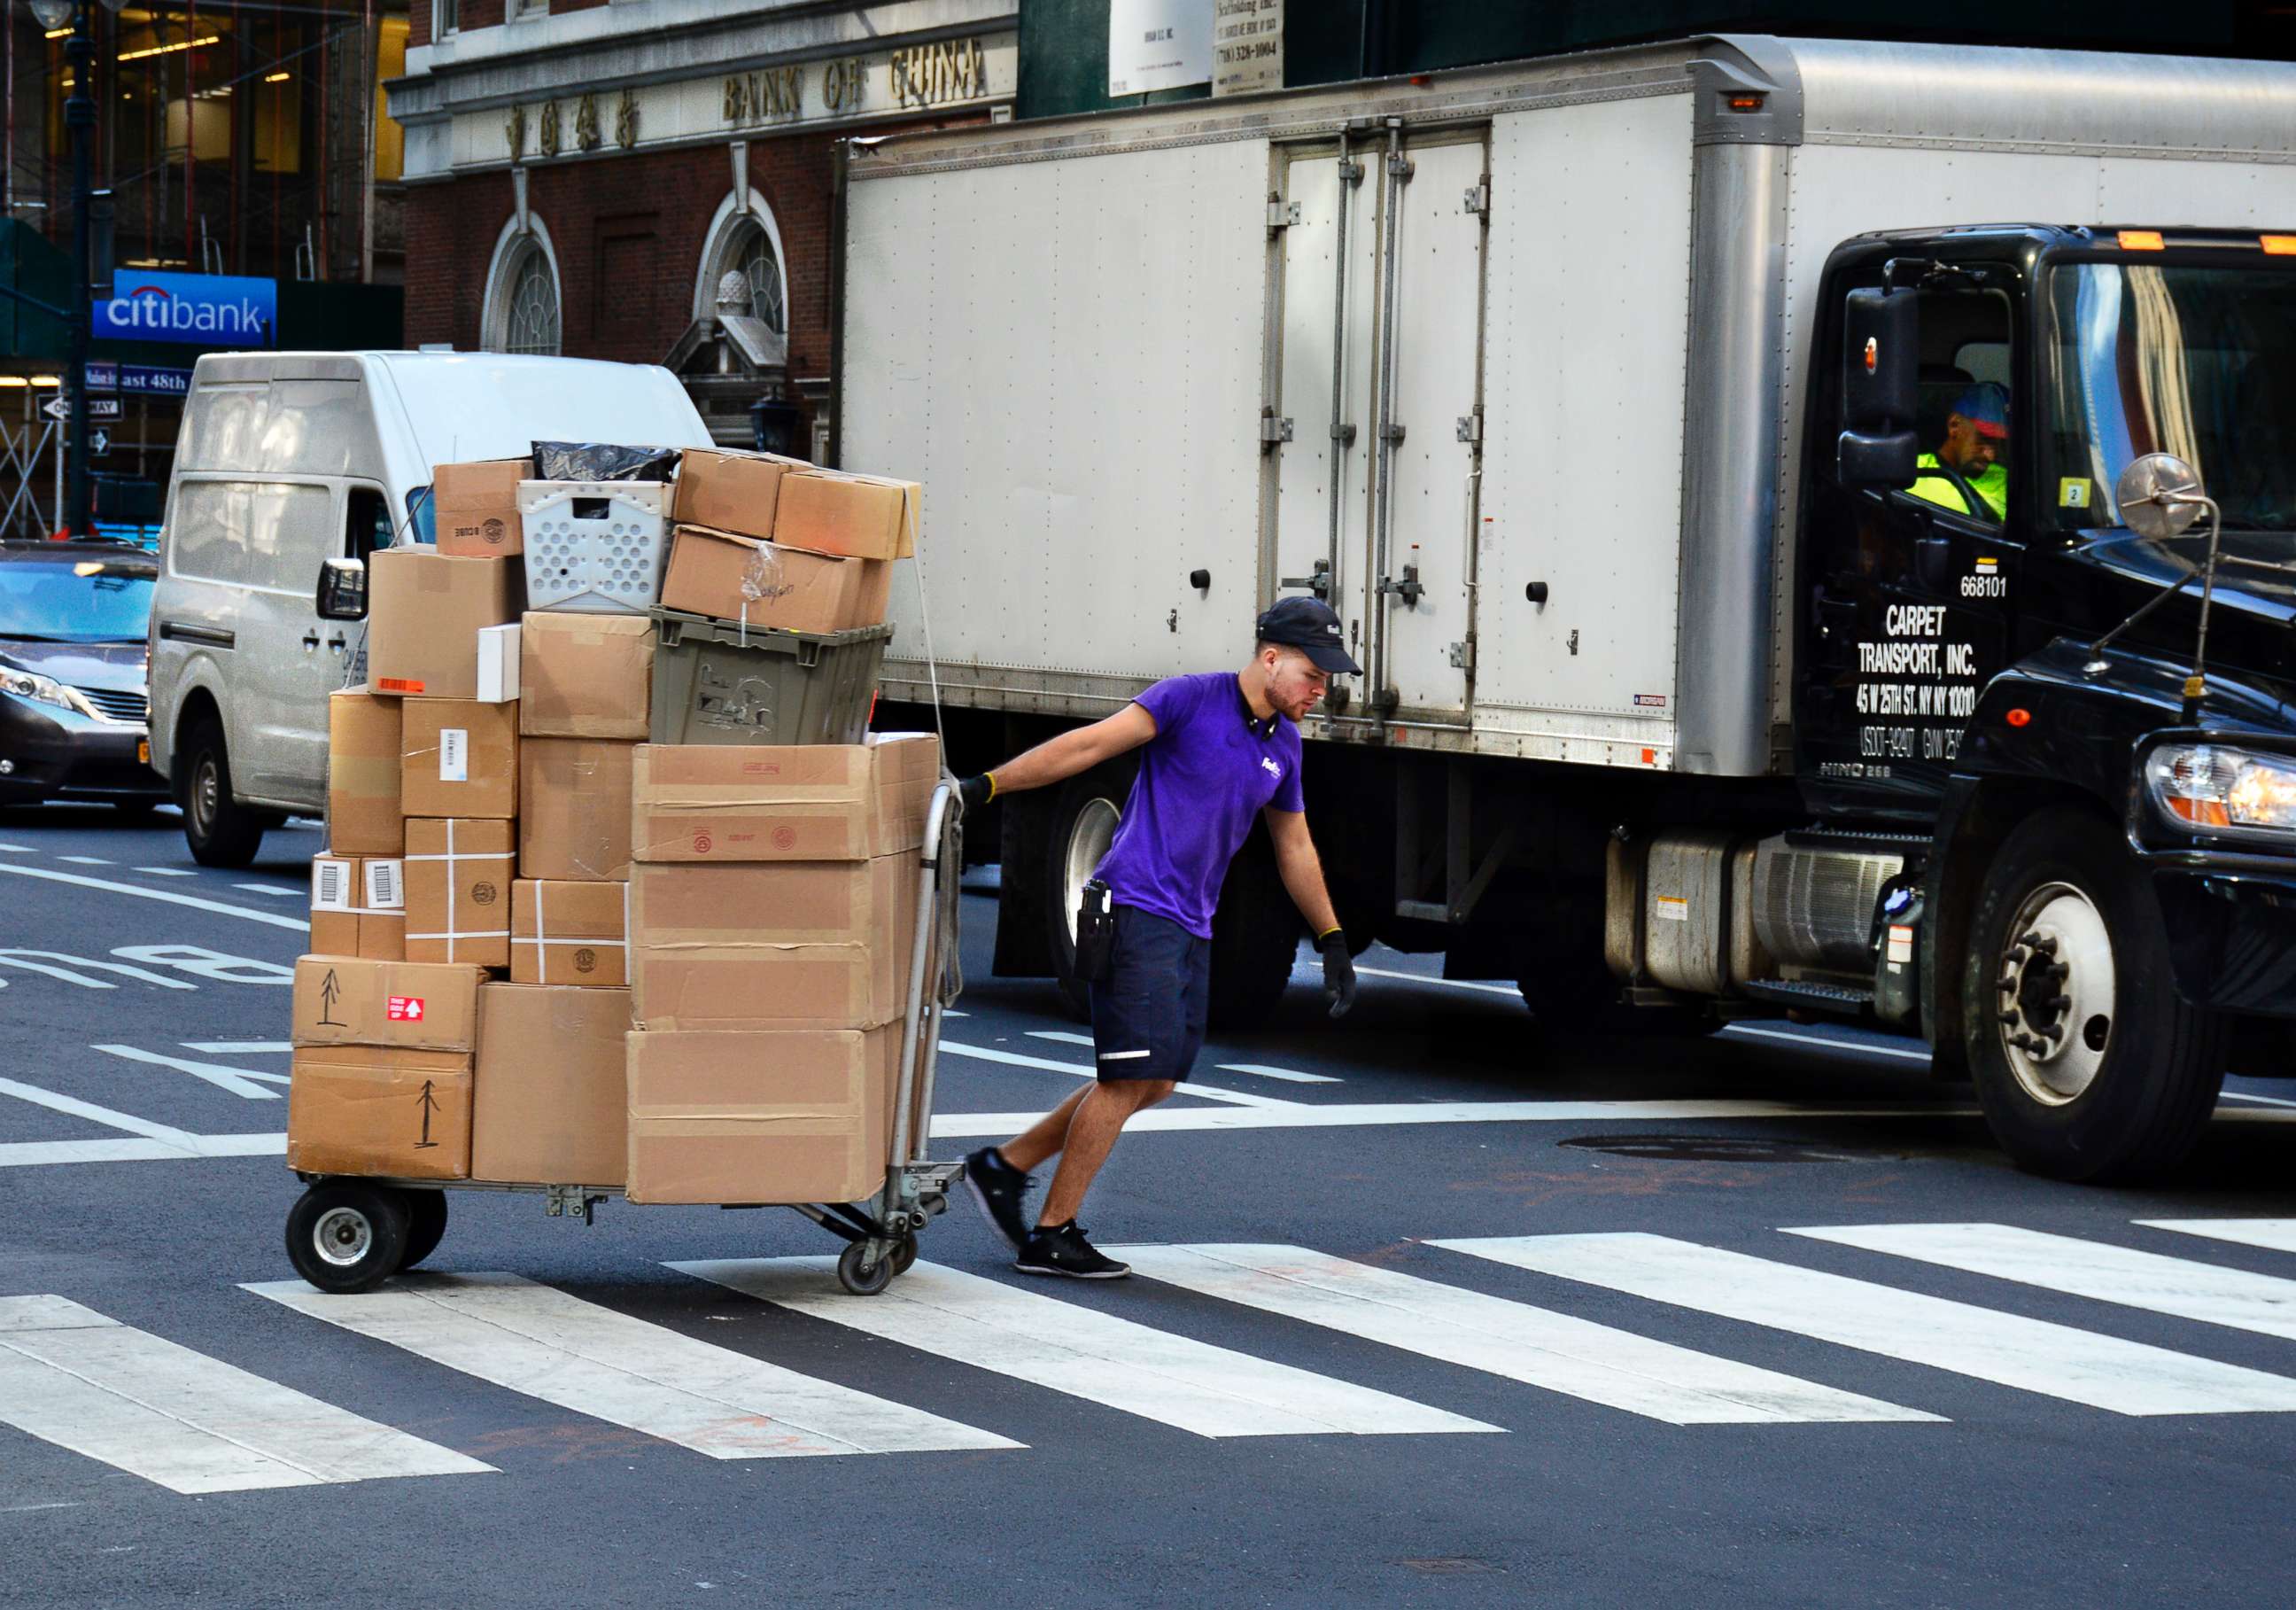 PHOTO: A Federal Express deliveryman pulls a cart loaded with packages across a street in New York.